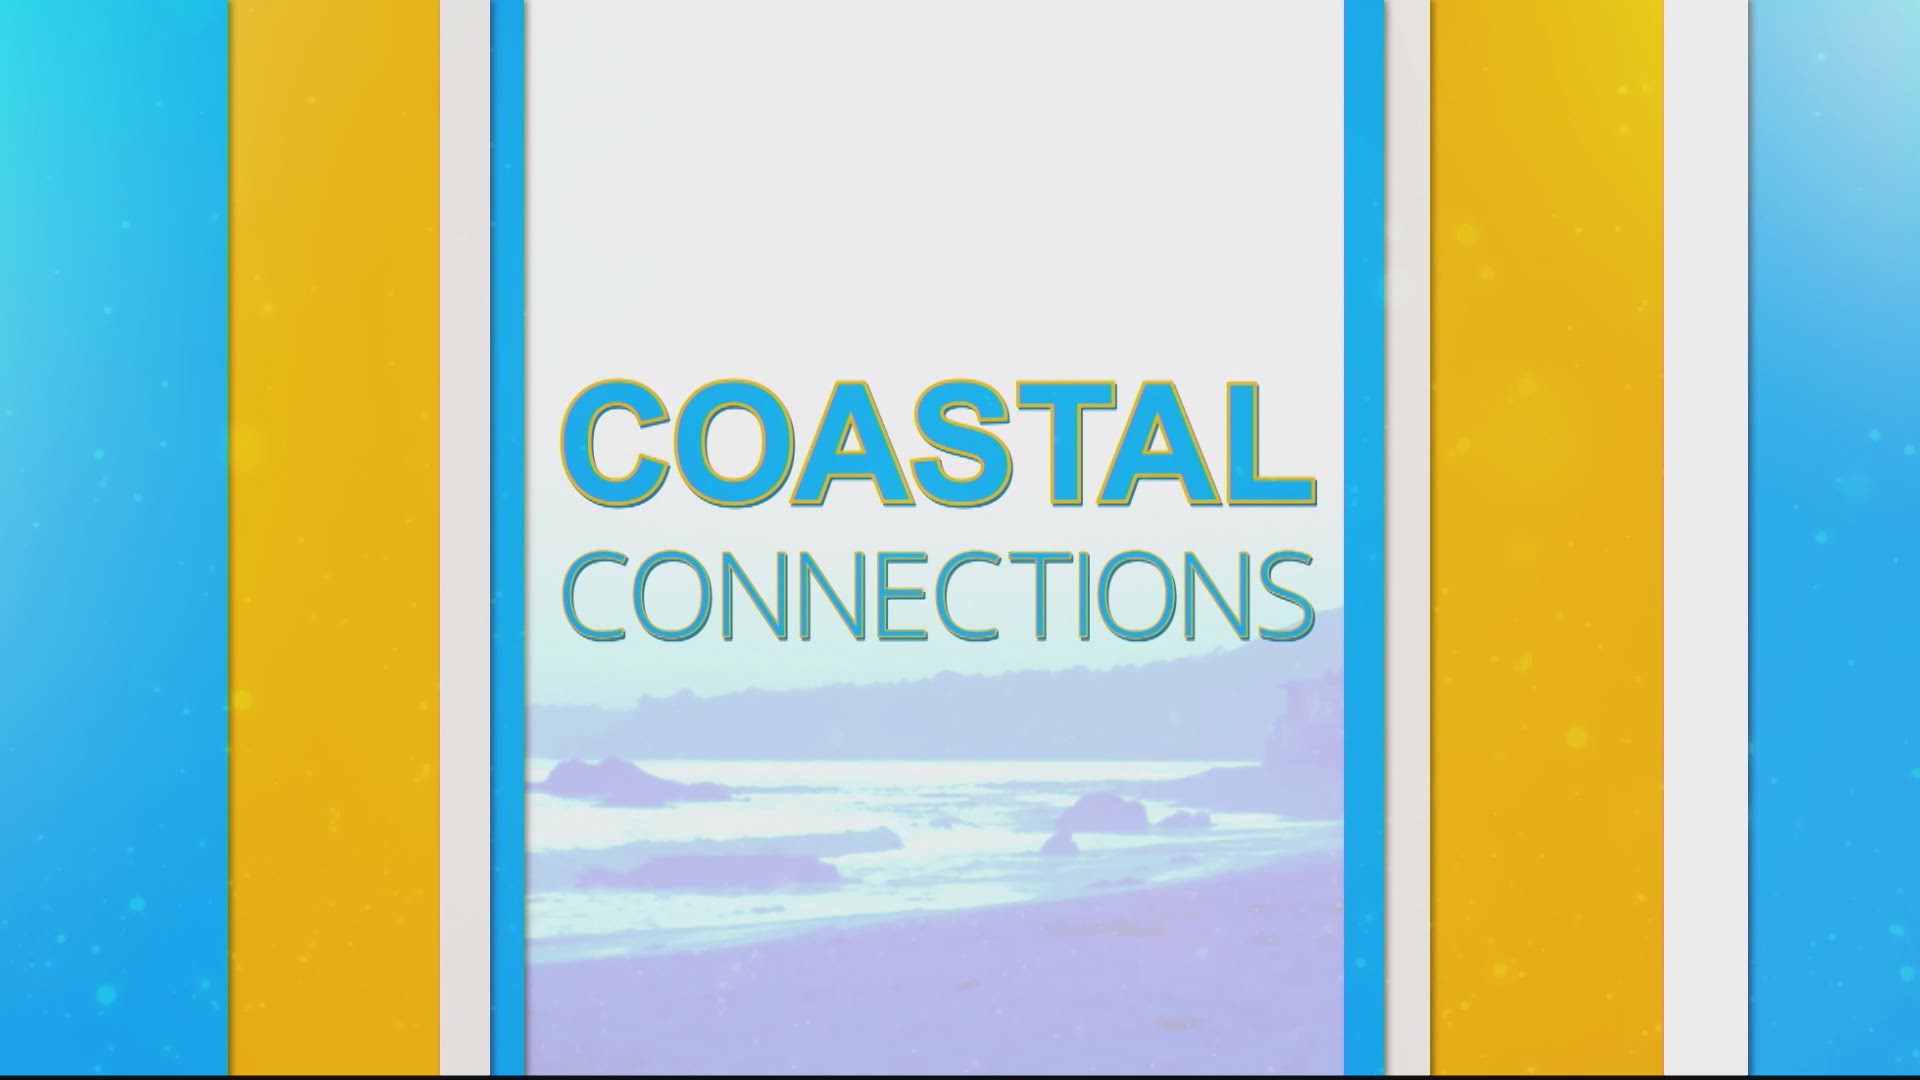 Join us, for another edition of Coastal Connections highlighting the Salvation Army ARC, Shamrock Weekend, The Heart & Stroke Ball, Hampton Quilt Festival, and the 2019 Virginia Commemoration in Williamsburg and Jamestown.